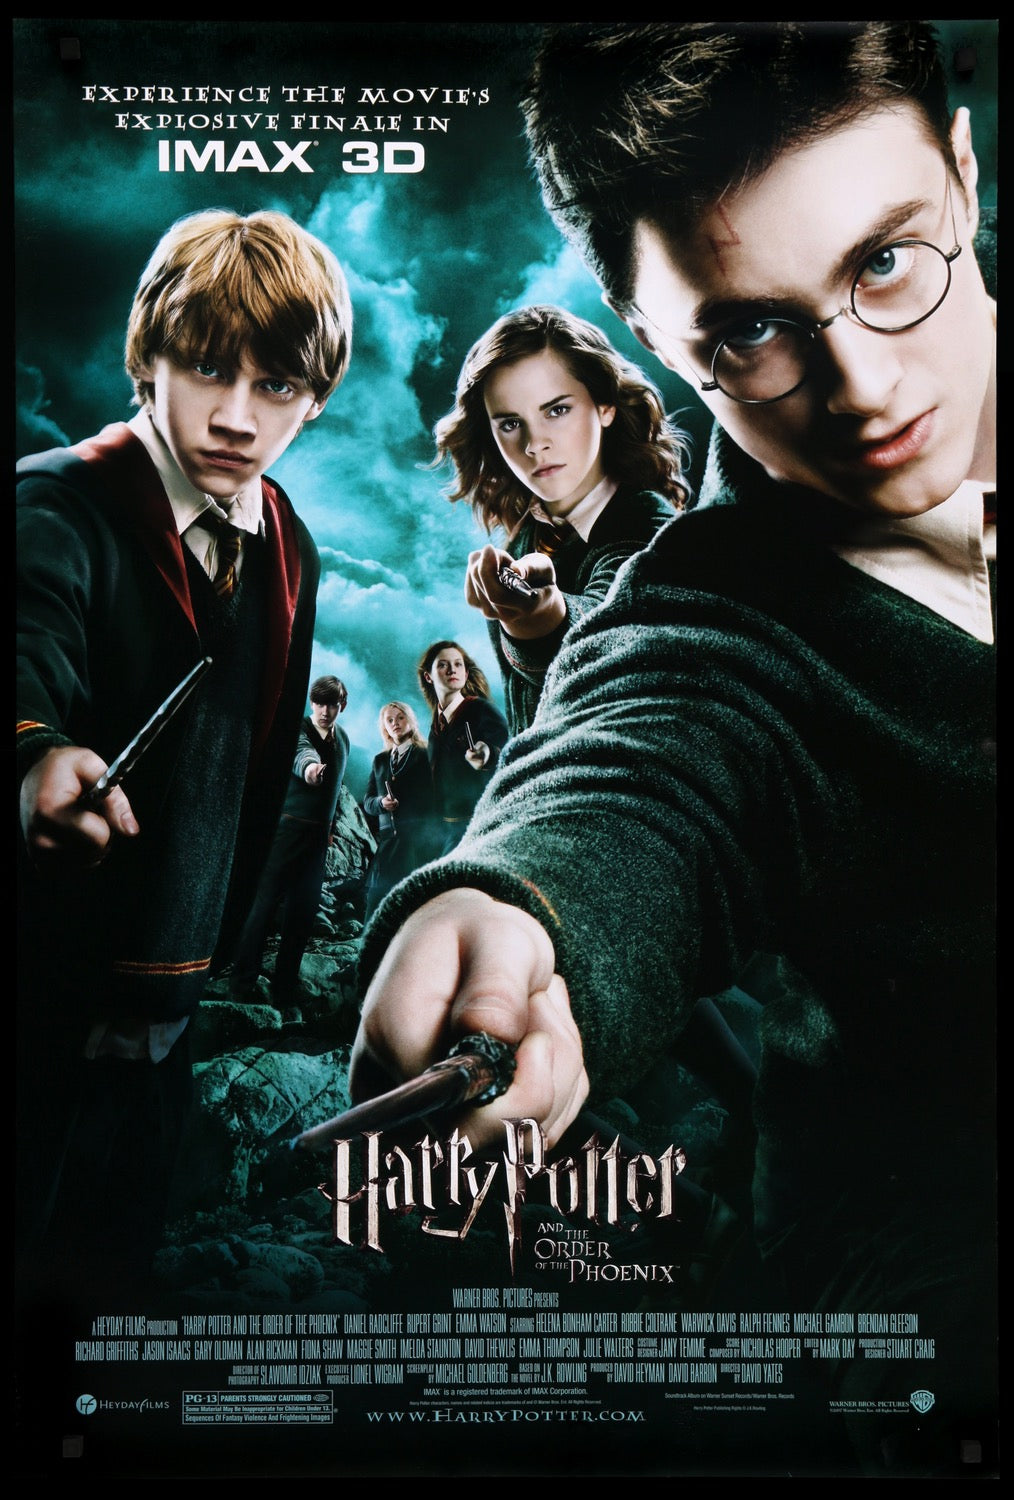 Harry Potter and the Order of the Phoenix (2007) original movie poster for sale at Original Film Art